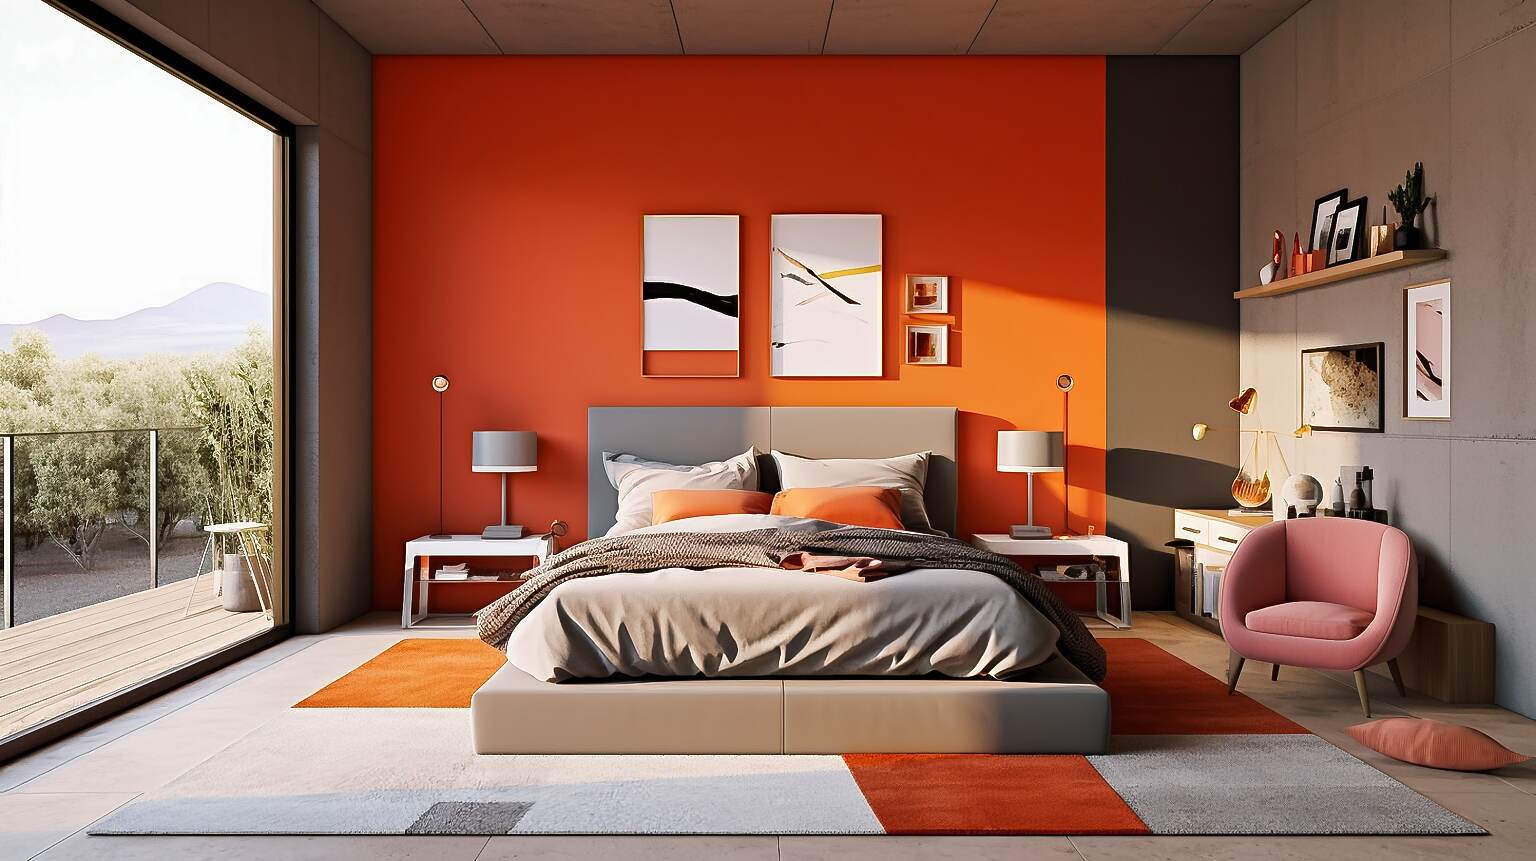 Image Of A Bedroom That Showcases Color Contrast